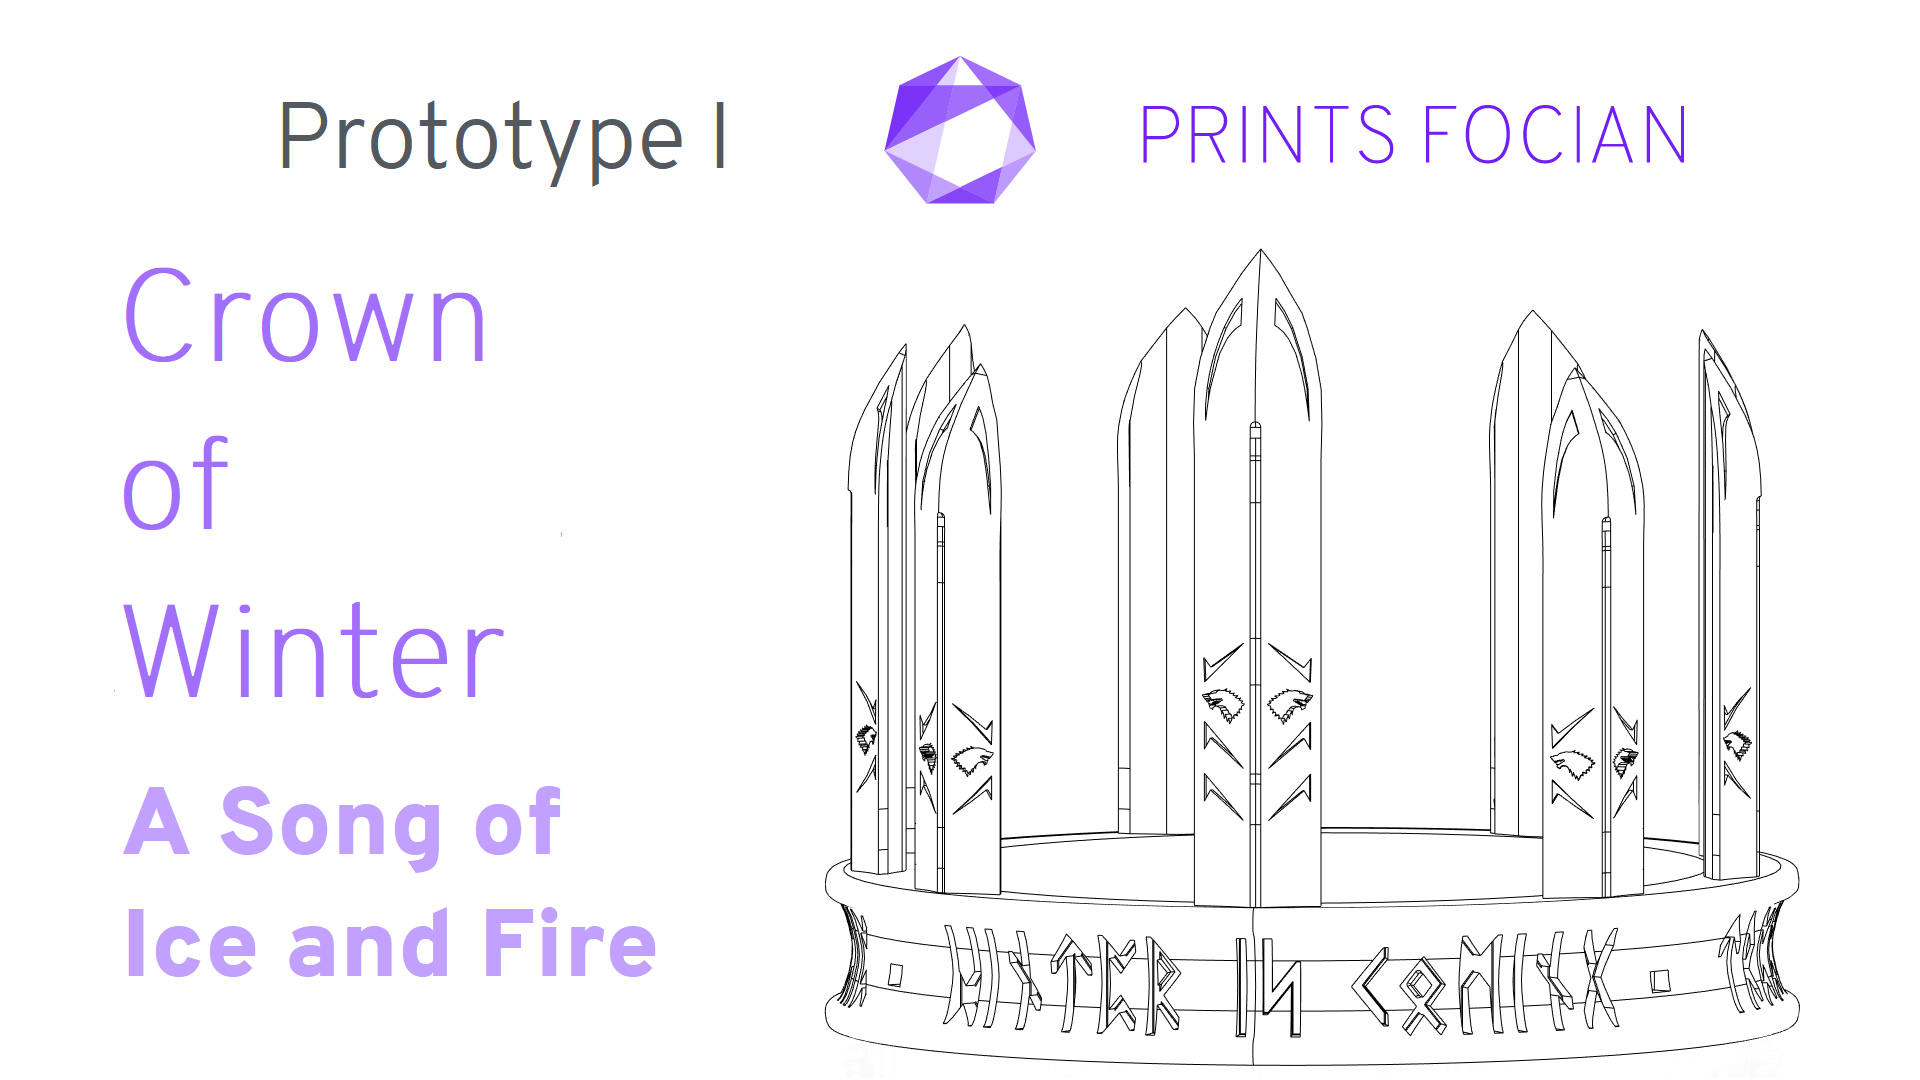 Wireframe image of the Crown of WInter on a white background. Prints Focian Icon top and central. Text: Purple Prints Focian, Crown of Winter, A Song of Ice and Fire and dark grey Prototype II